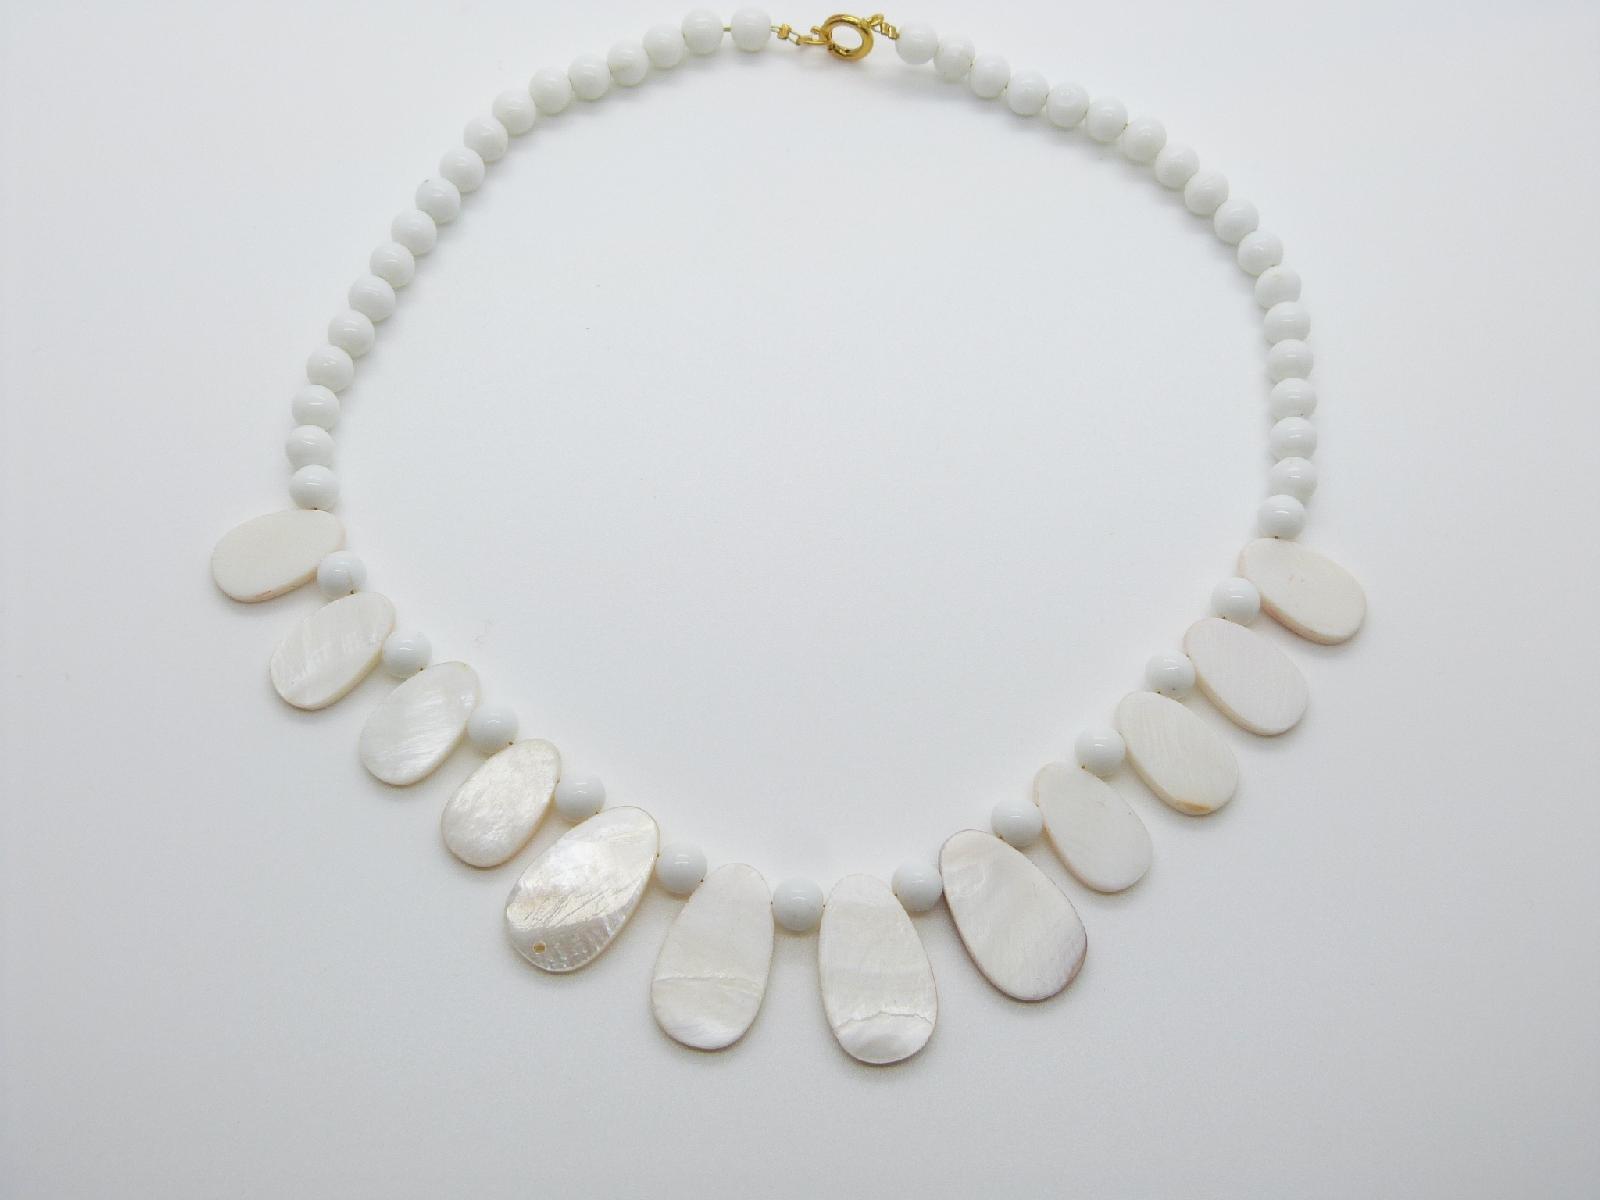 £14.00 - Vintage 50s White Glass and Mother of Pearl Drop Bead Necklace Stunning